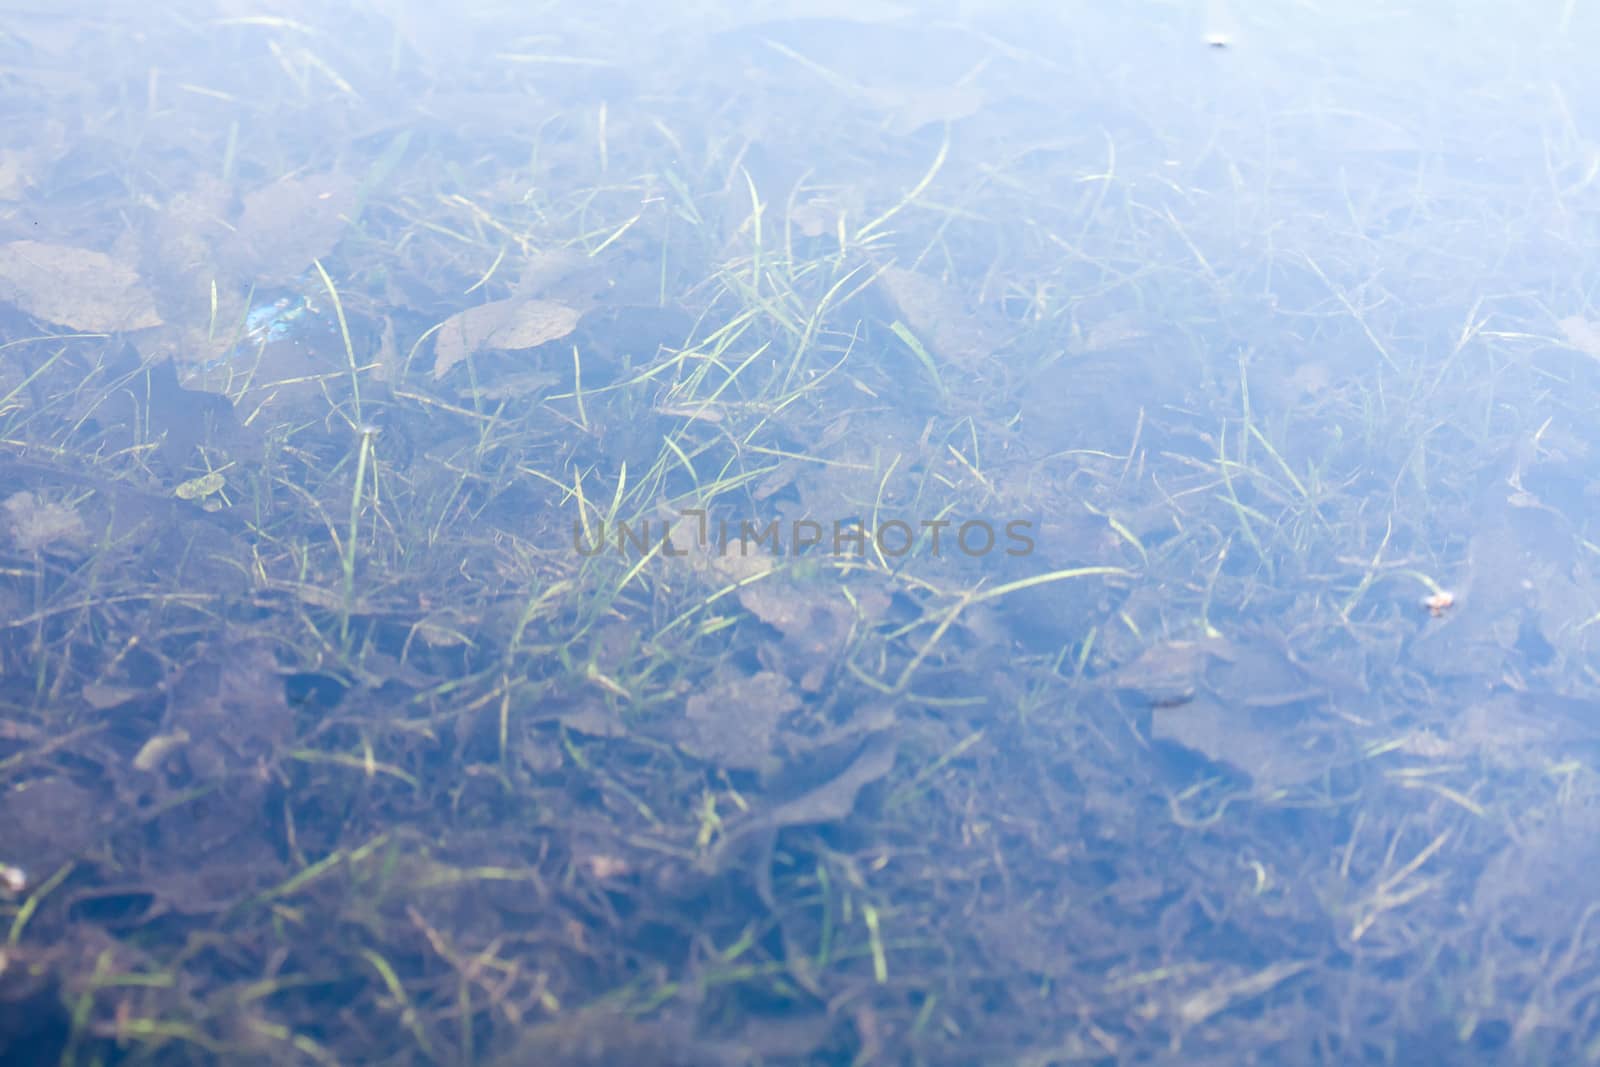 grass and plants submerged in clear water by sfinks